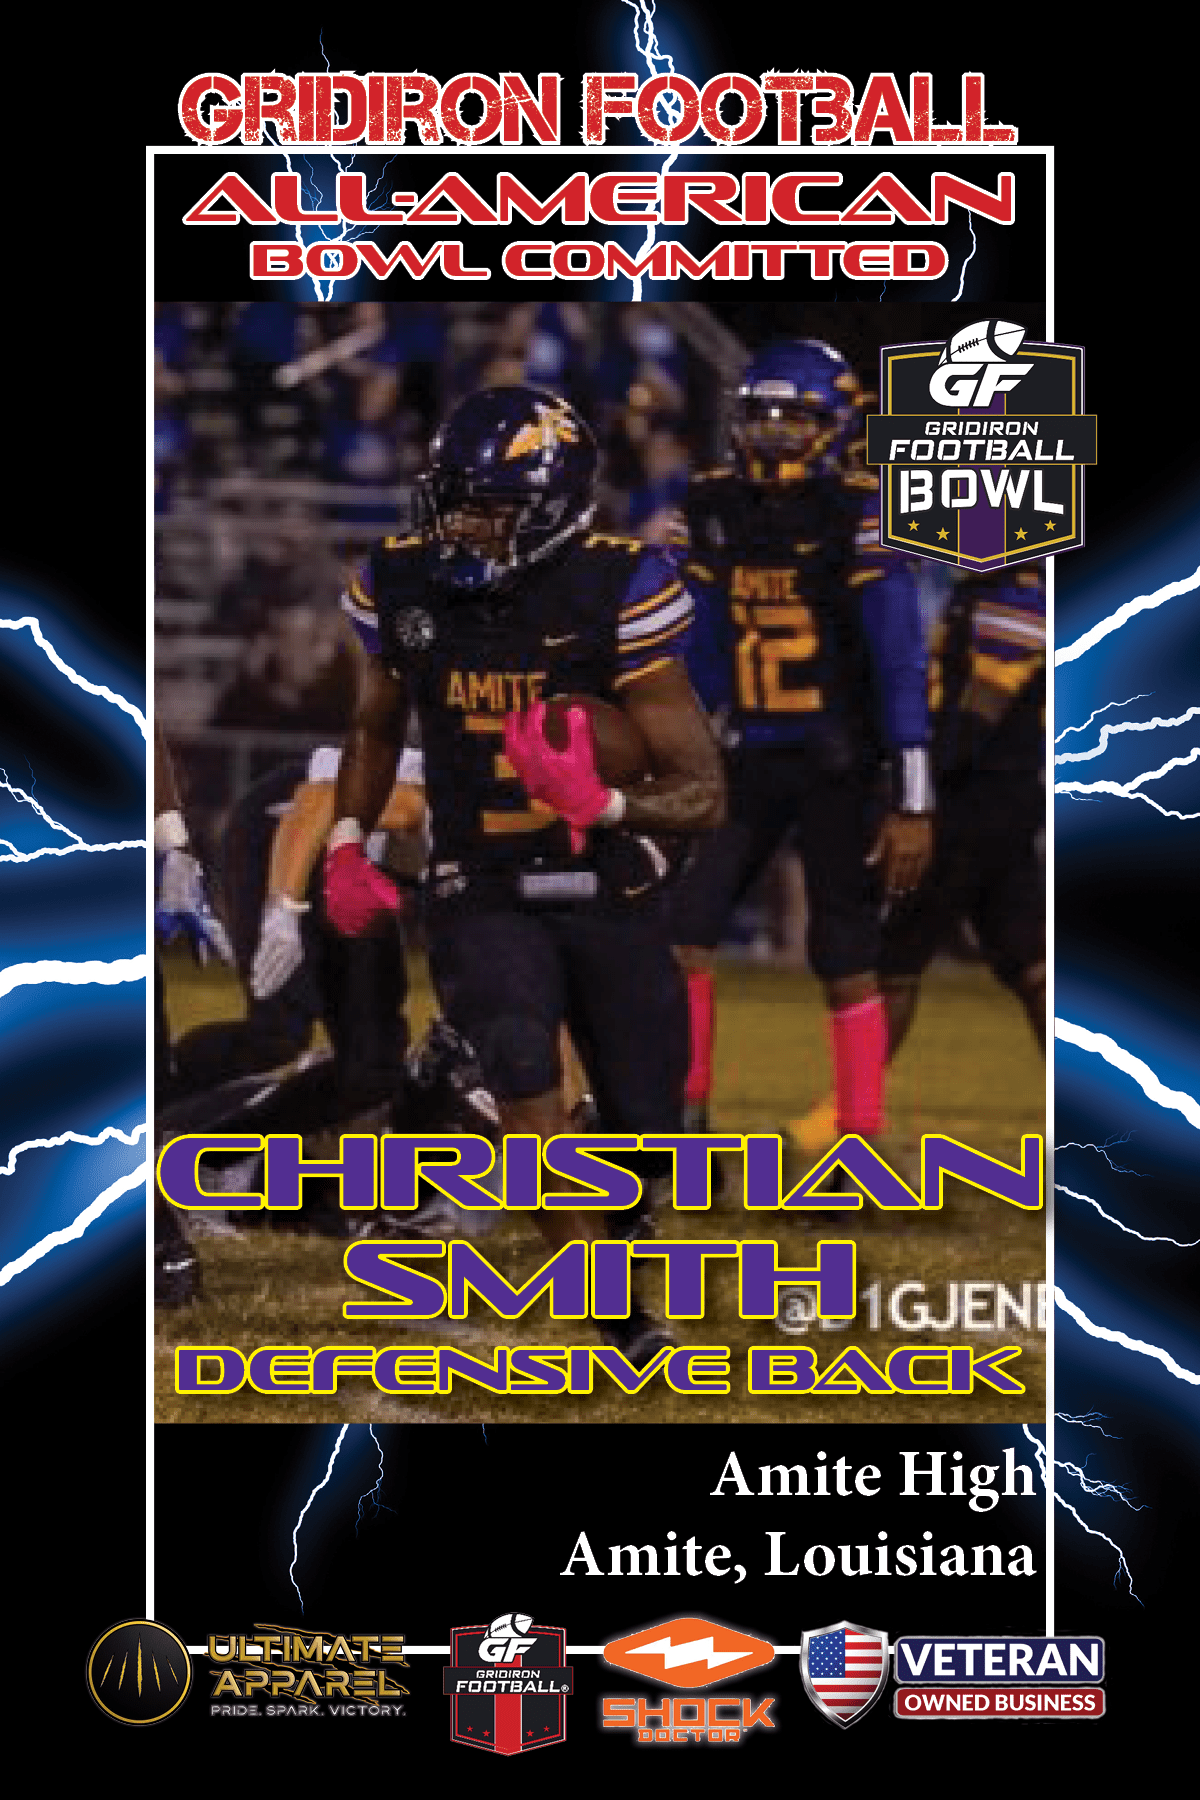 BREAKING NEWS: Amite High School (La.) RB Christian Smith is committed to play in the 2023 Gridiron Football All-American Bowl